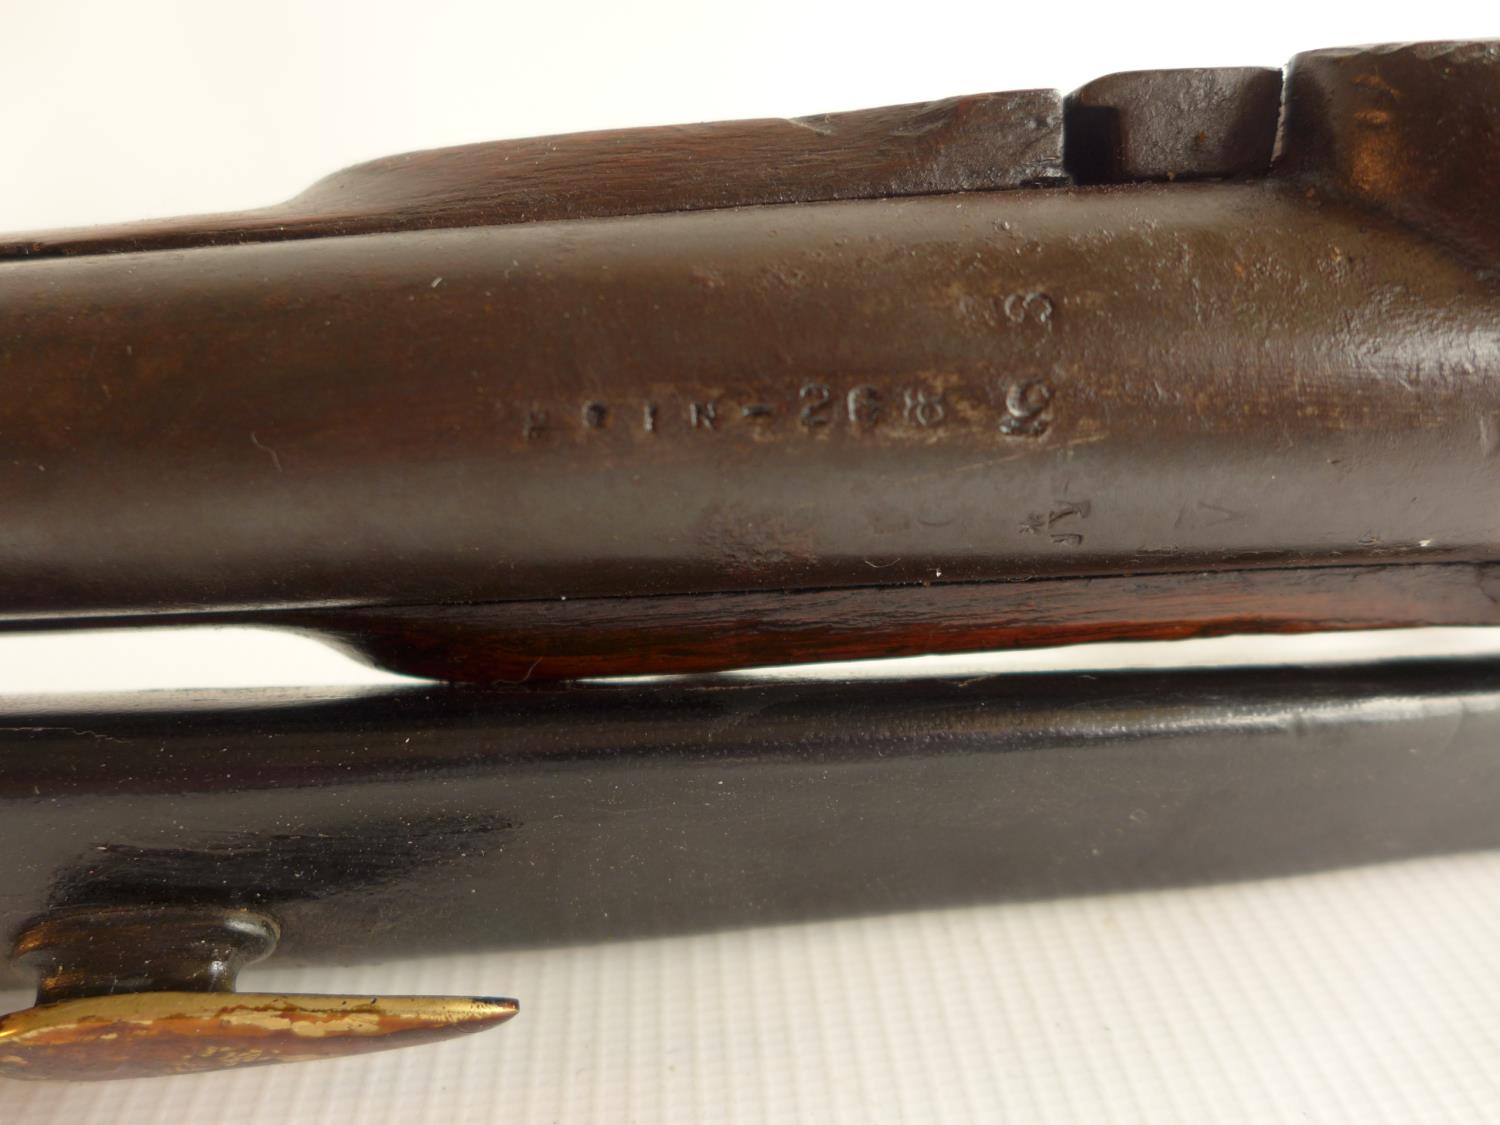 AN EAST INDIA COMPANY PERCUSSION CAP BROWN BESS MUSKET AND BAYONET, LOCK MARKED HURST, LENGTH OF - Image 6 of 11